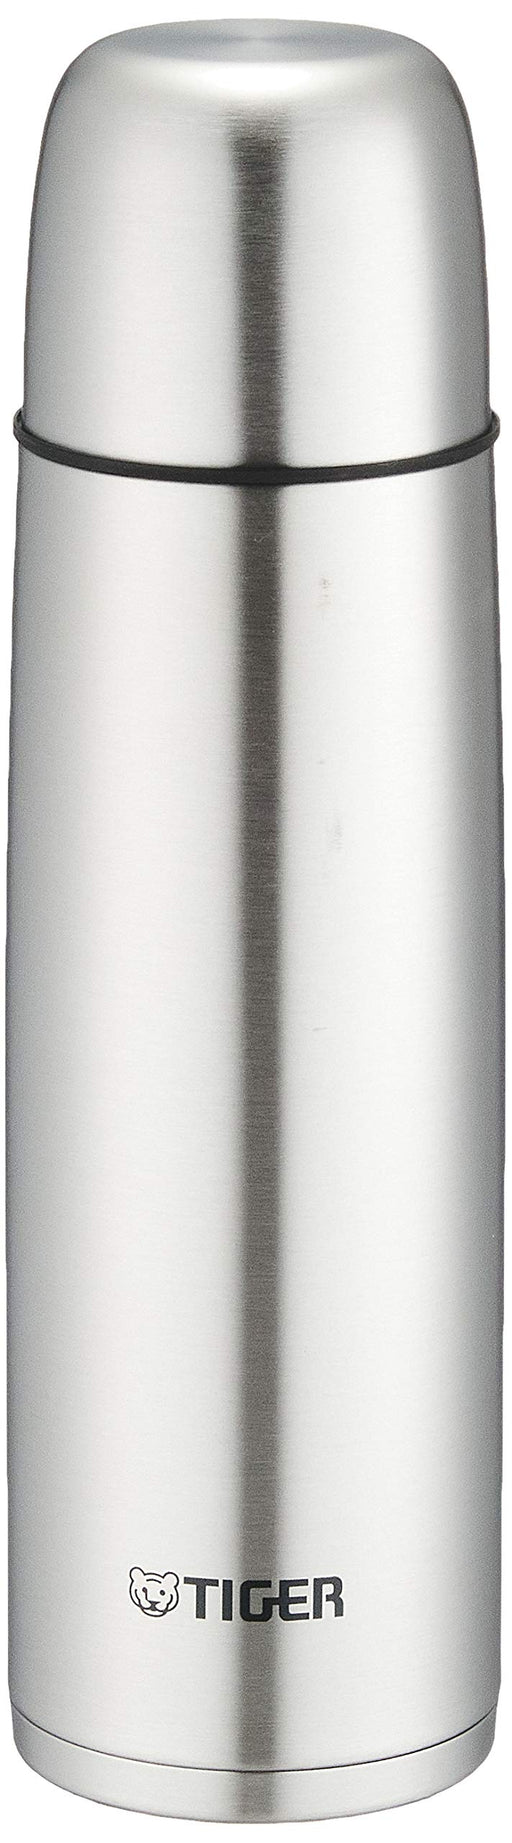 Tiger thermos water bottle 500ml Cup standard type MSC-C050-XS Stainless Steel_1